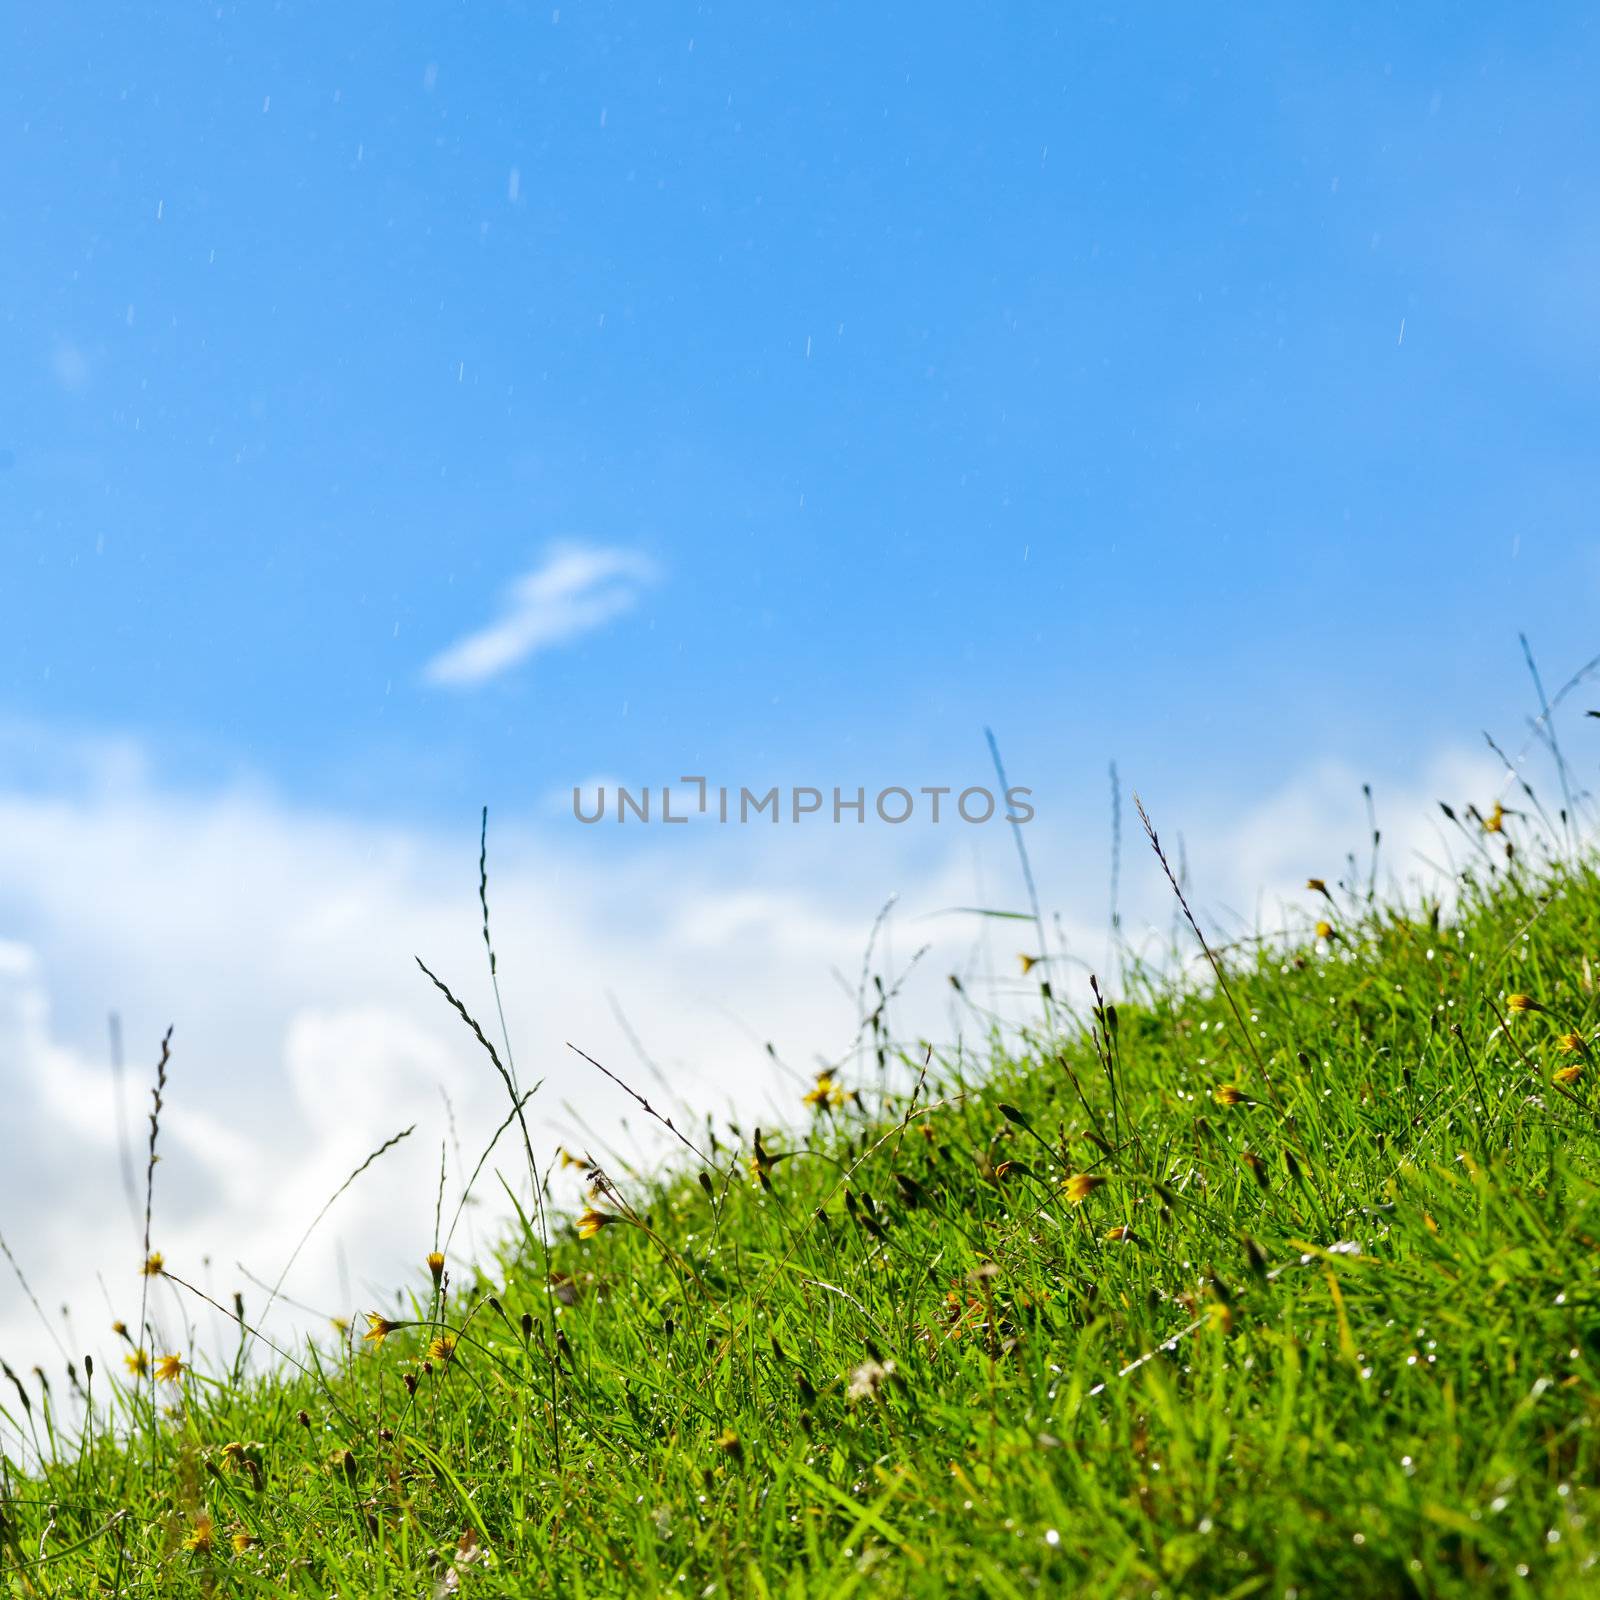 Green grass lawn against blue sky with raindrops